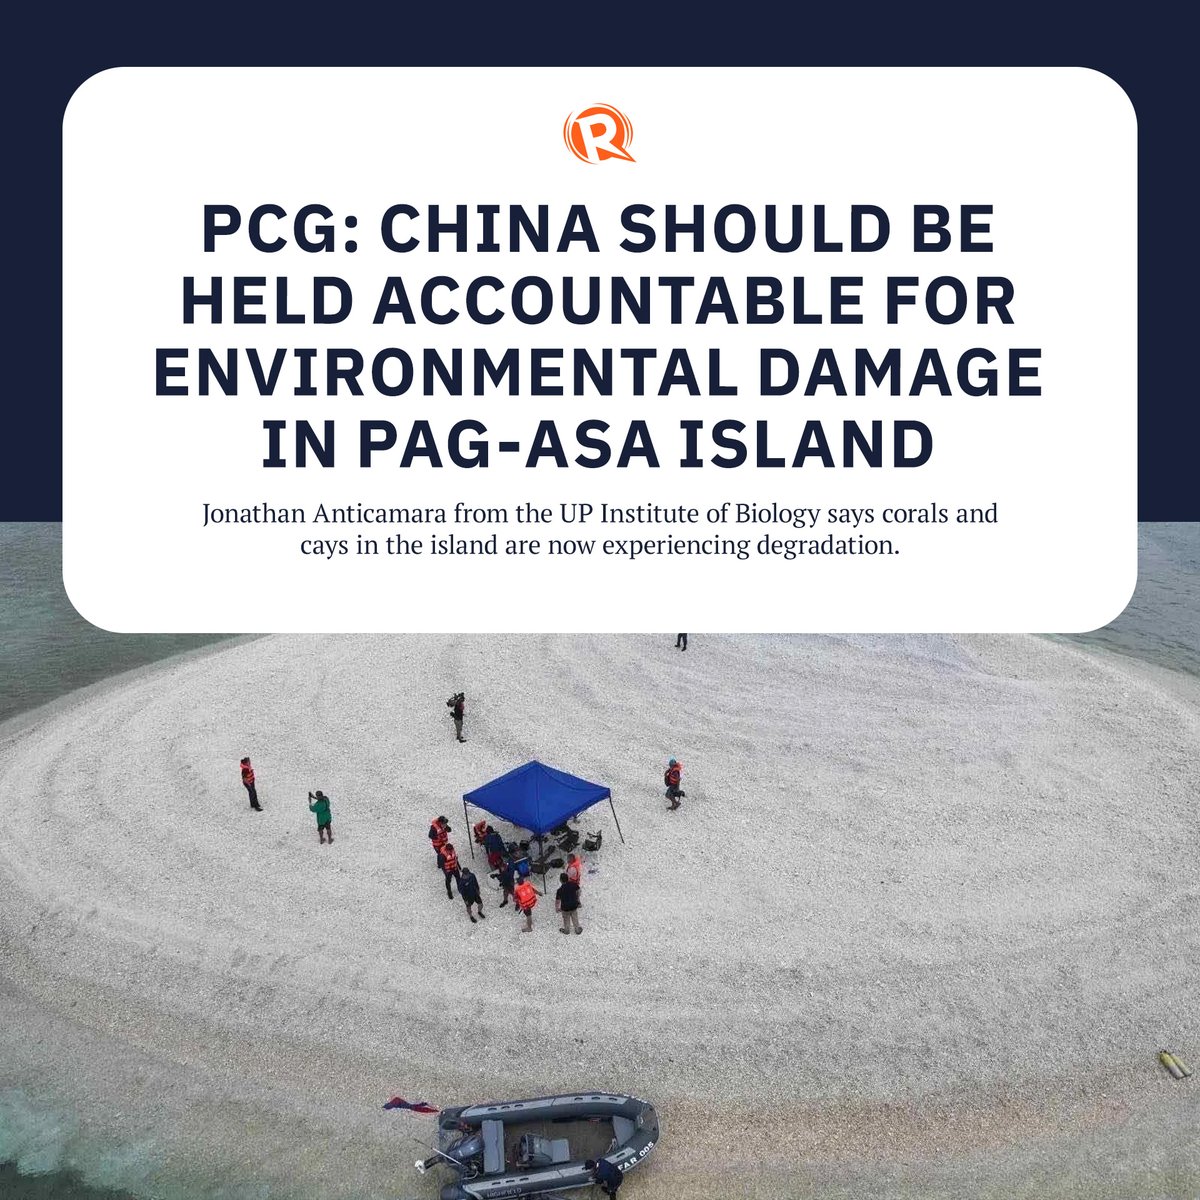 A Philippine Coast Guard official said China should be held accountable for environmental damage in and near Pag-asa Island (Thitu), located 300 nautical miles from Palawan. trib.al/4wD3DWC